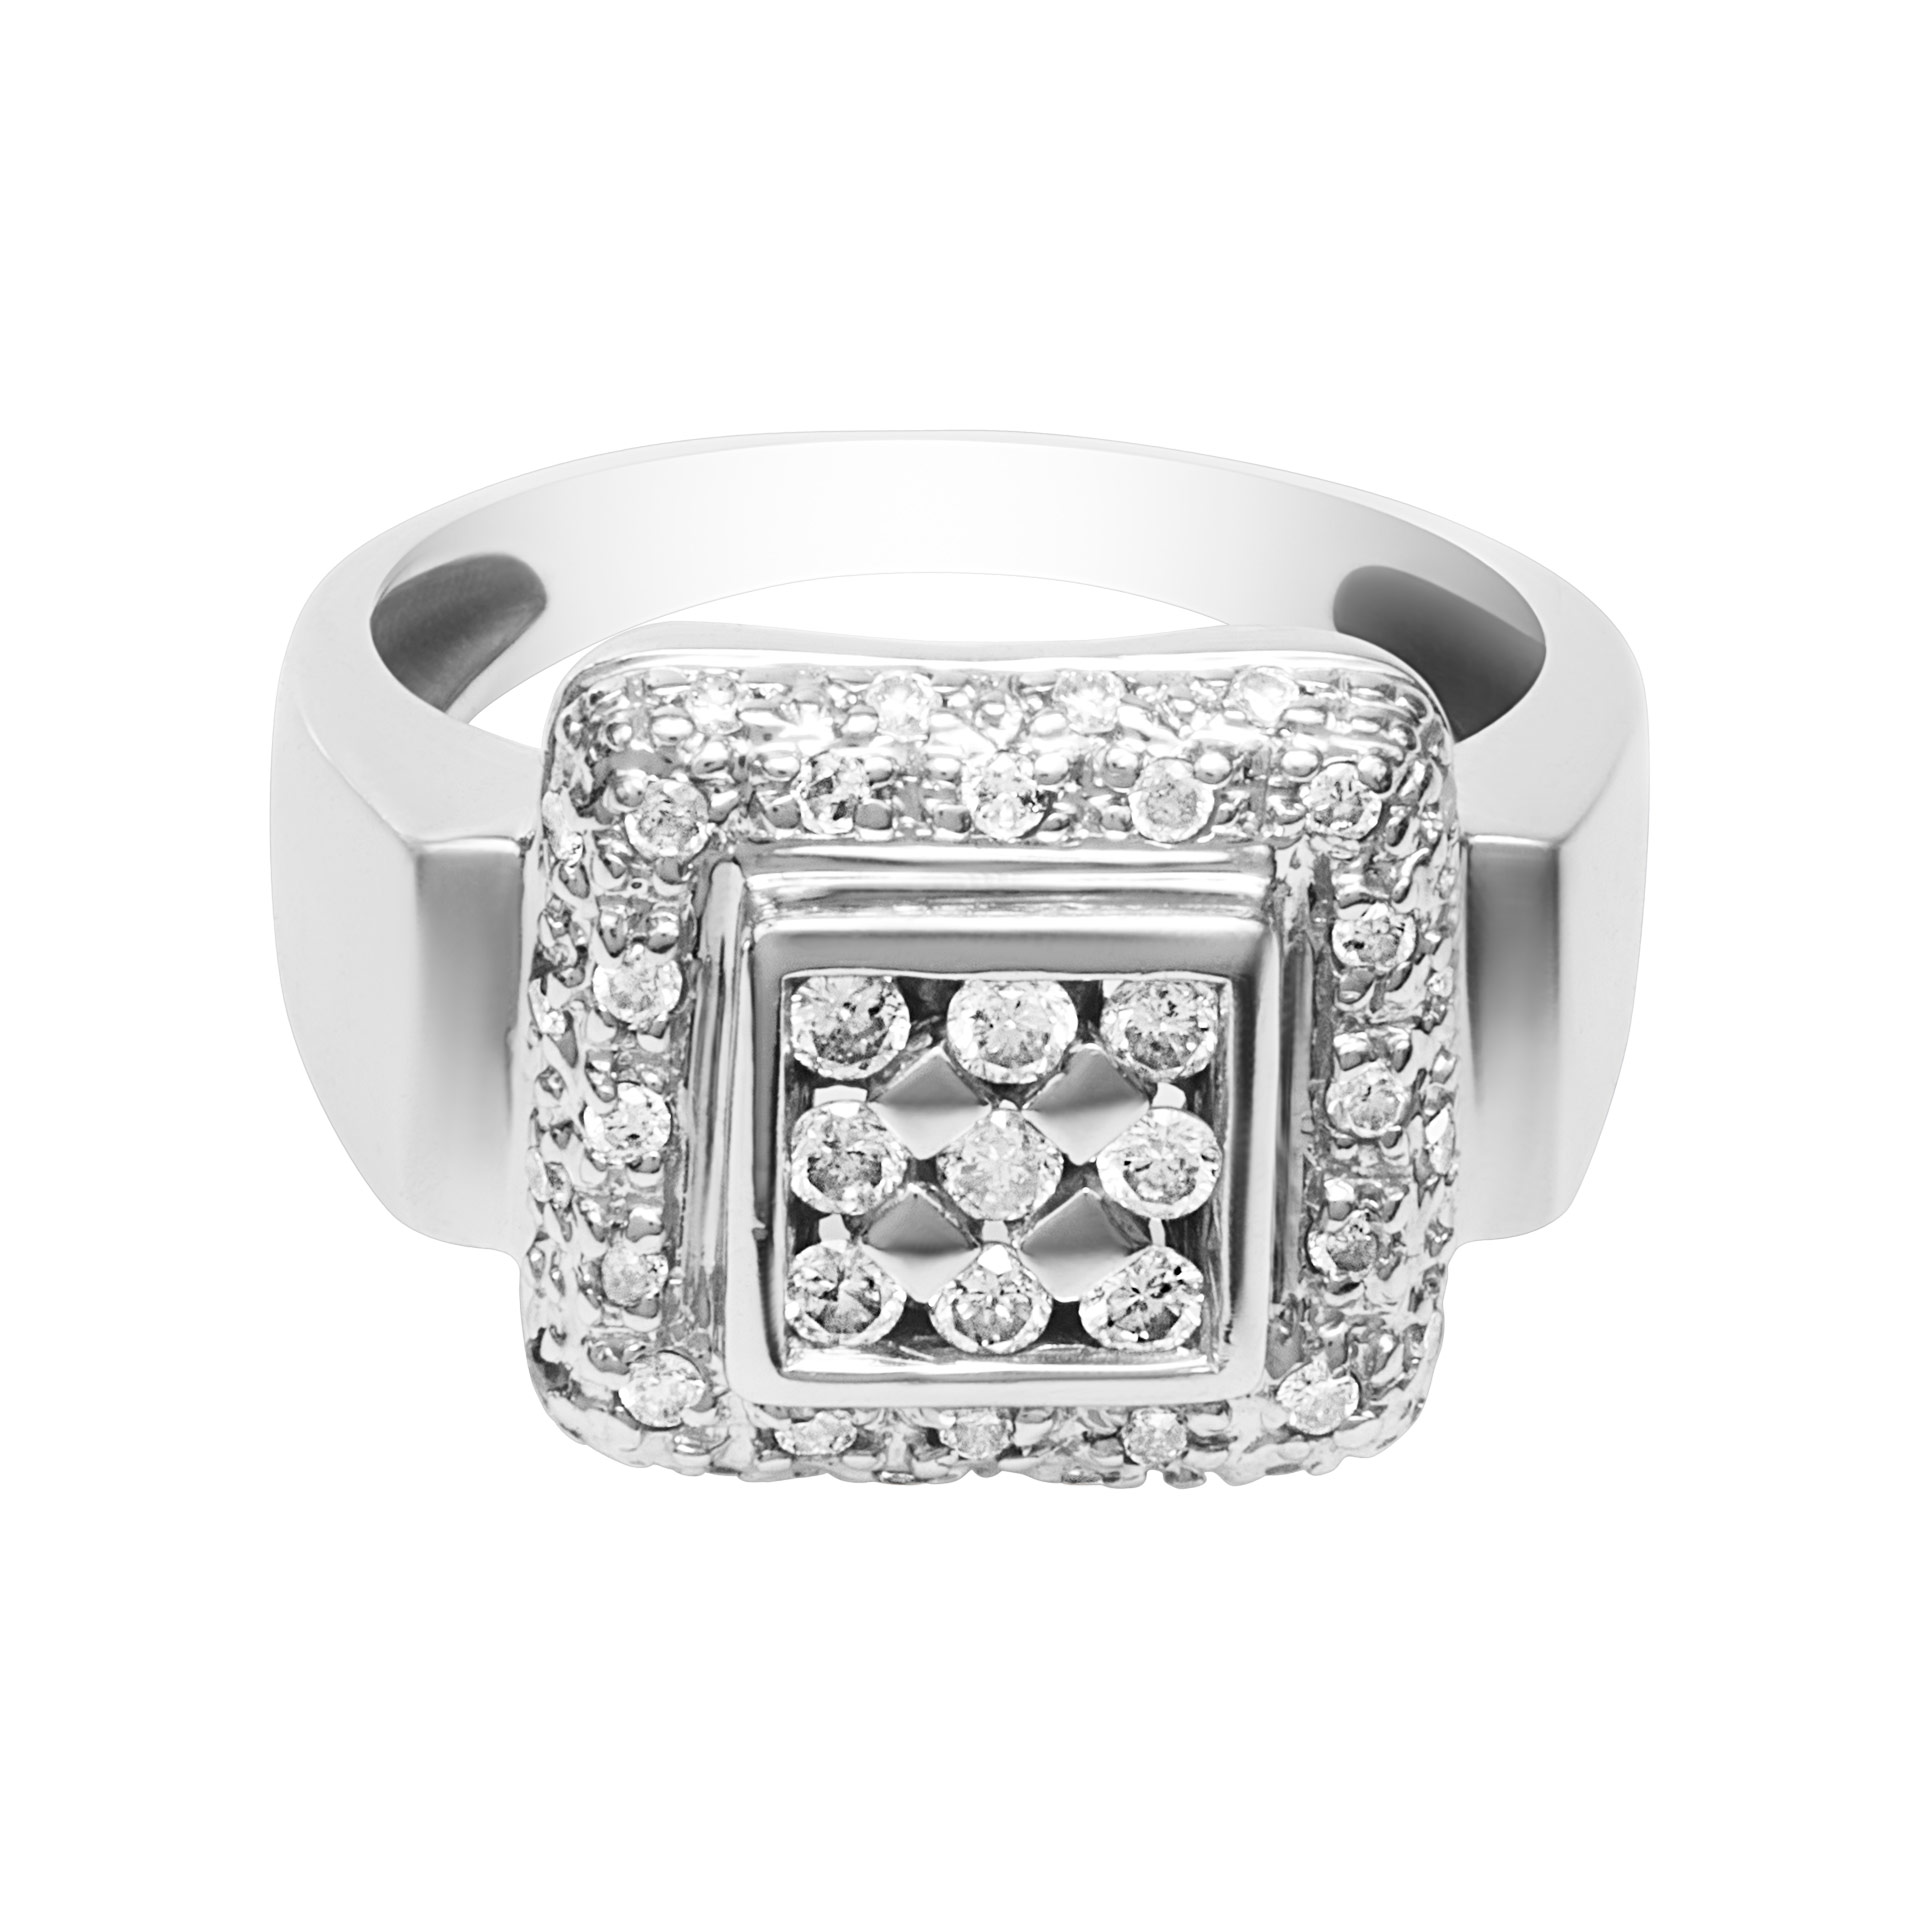 Modern style diamond ring in 18k white gold. 0.50 carats in clean white diamonds image 1